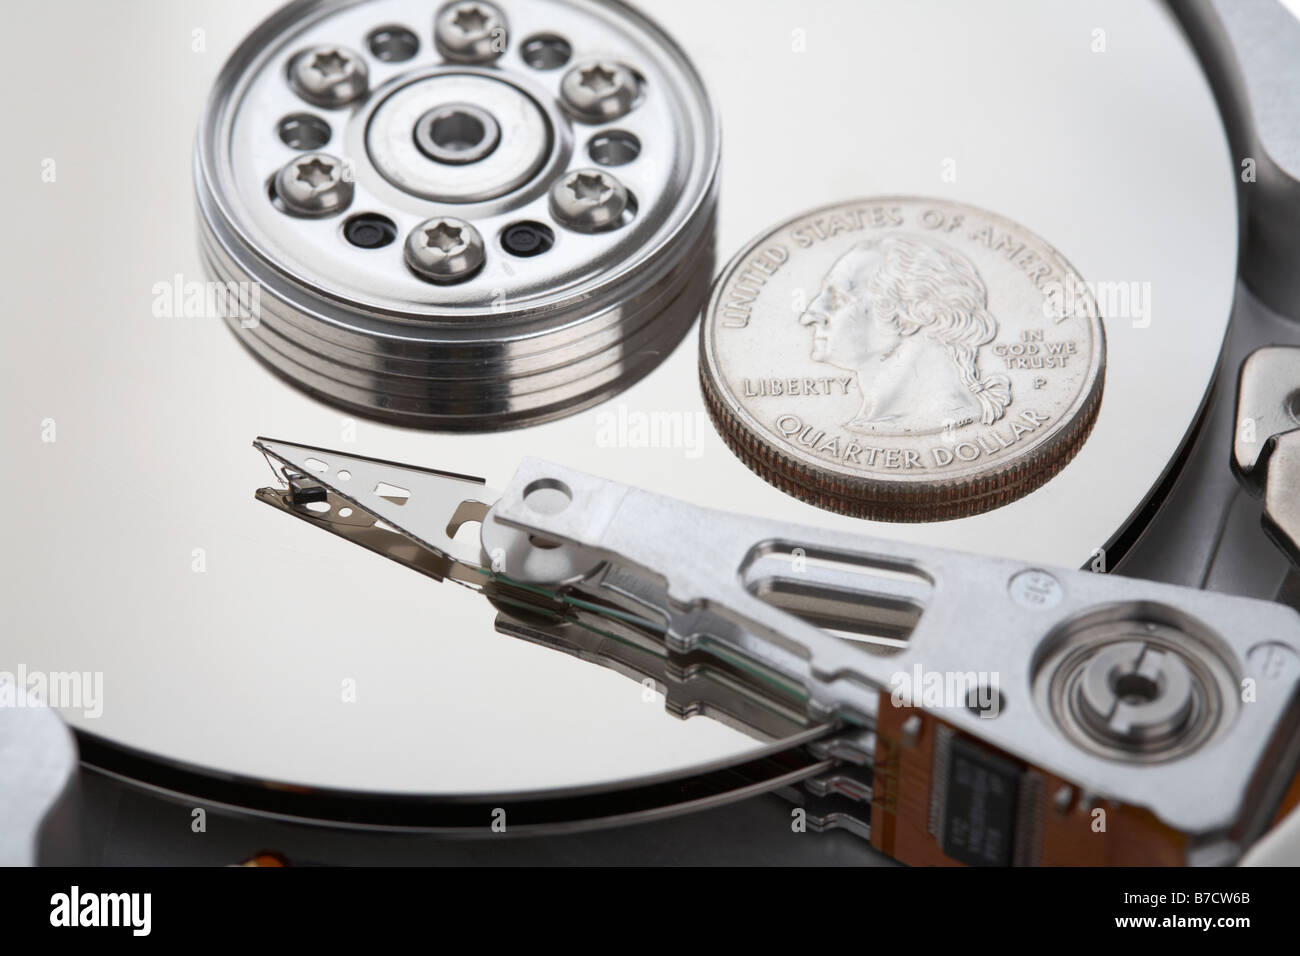 usa quarter dollar coin sitting on the platter of an open computer hard drive Stock Photo